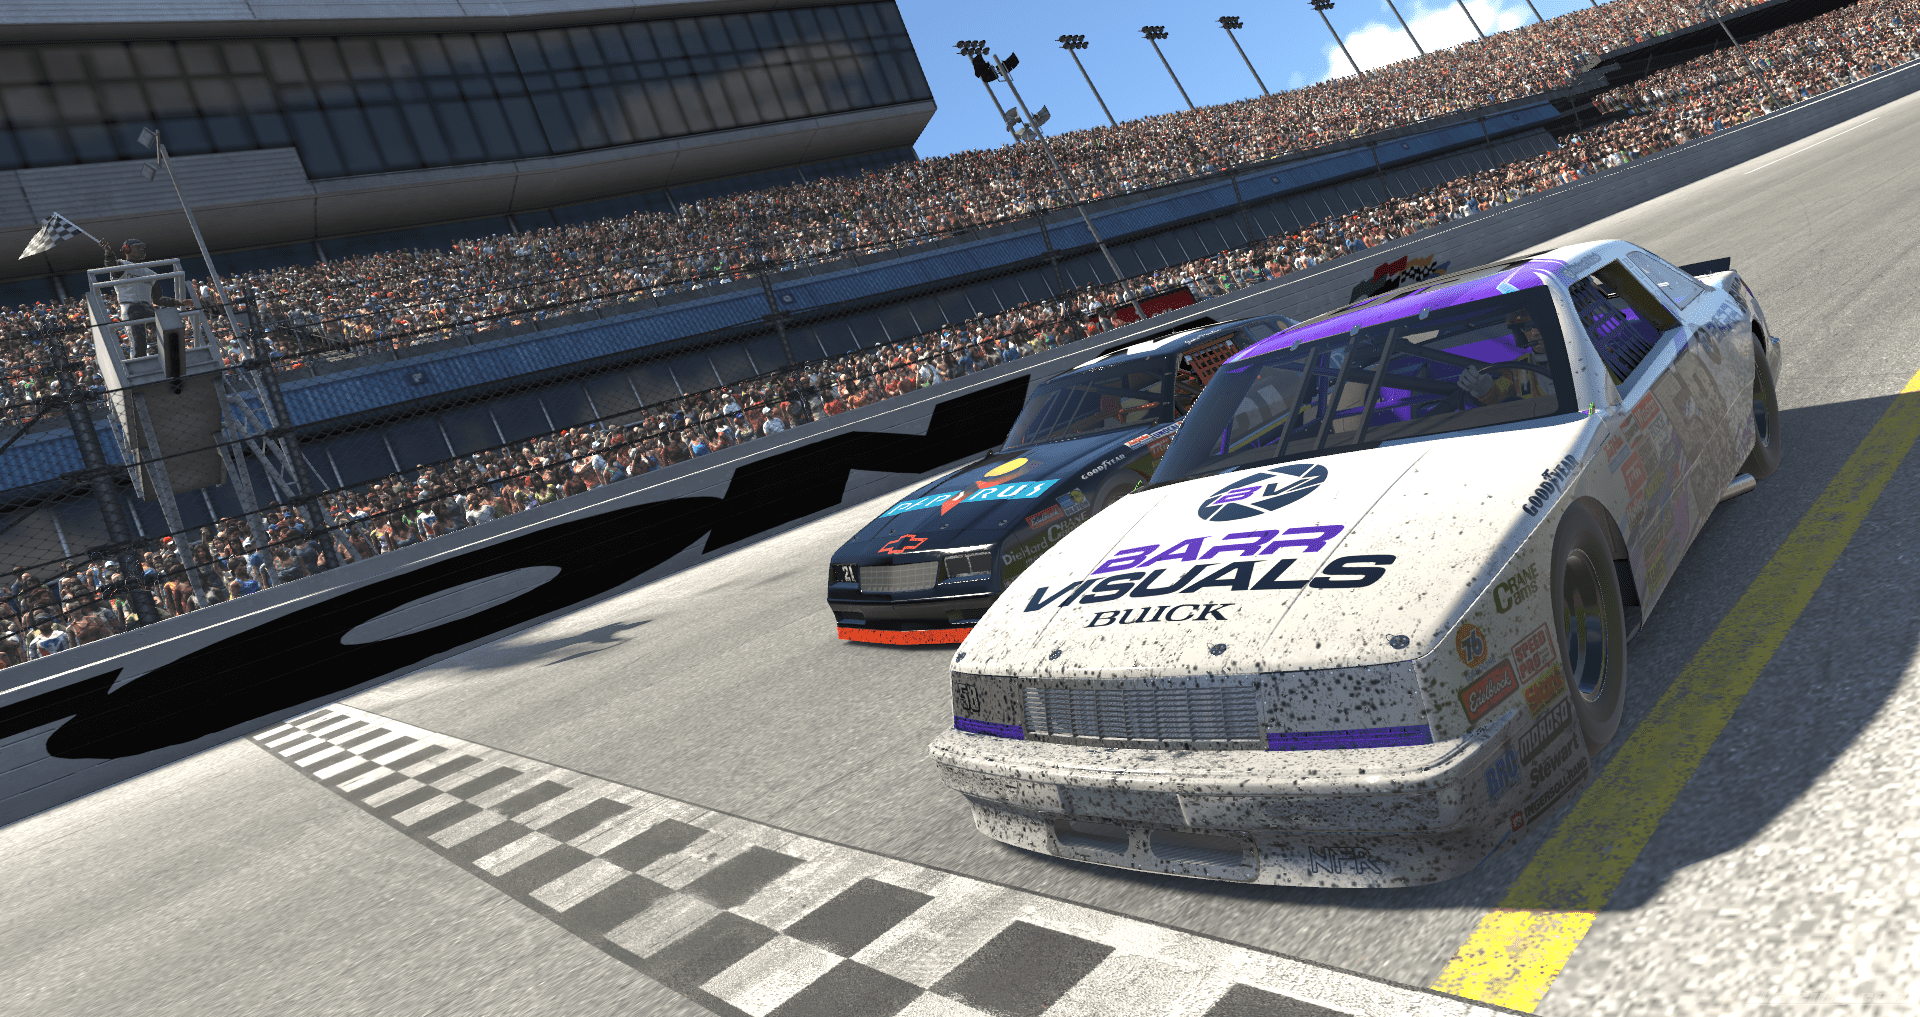 Michael Frisch takes the win in the Shenandoah Shine Legends of the Future Series Barr Visuals Legends 500 on iRacing.